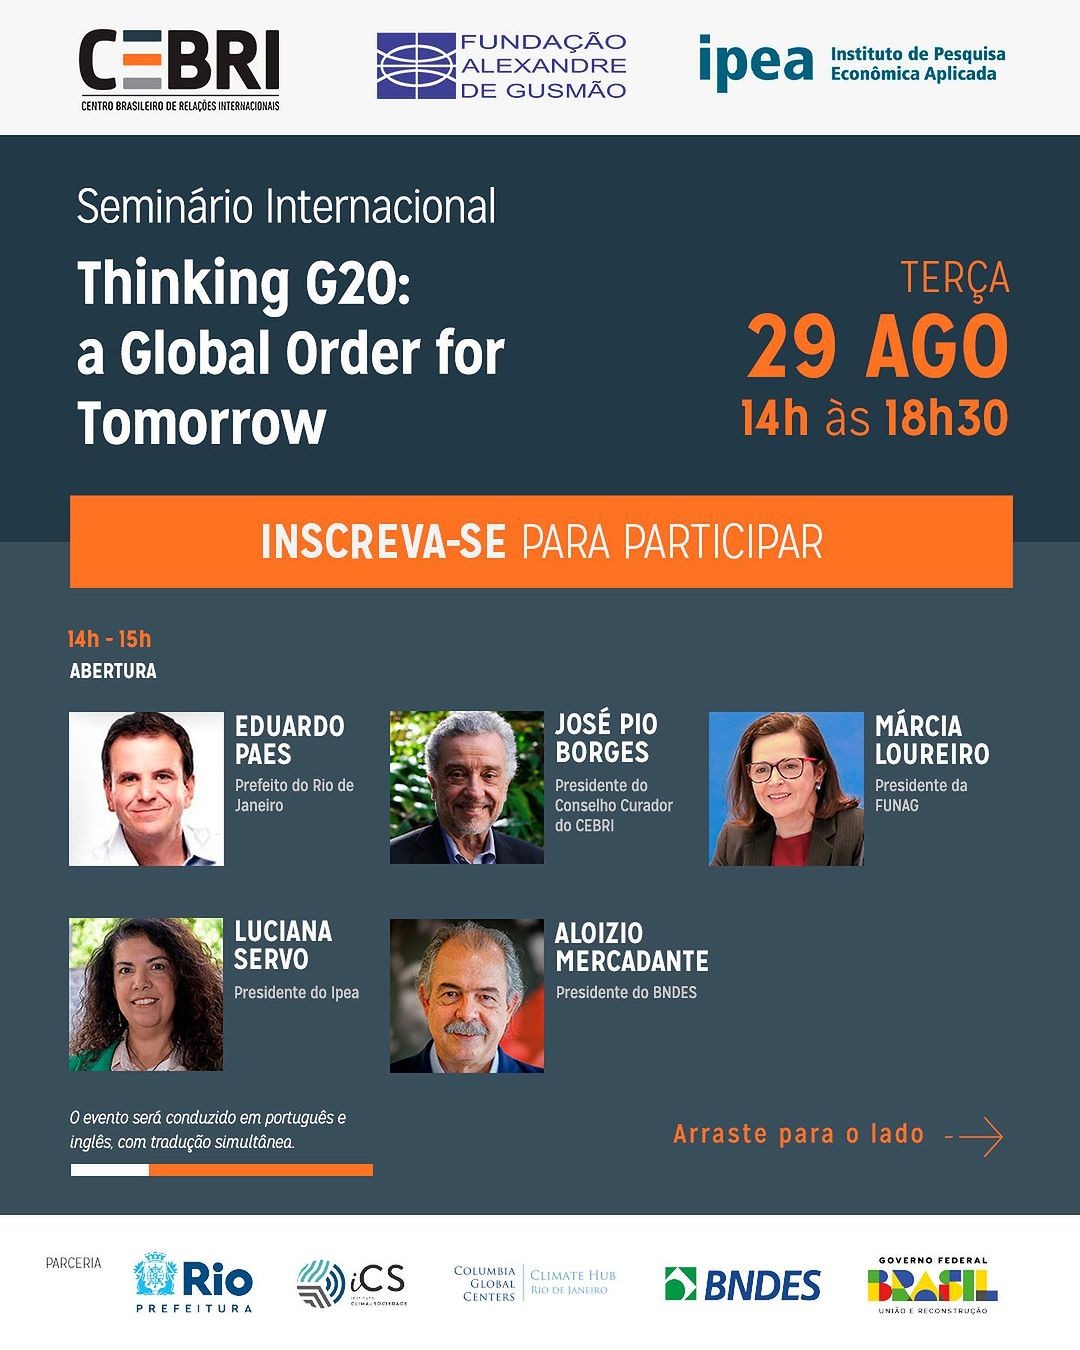 Thinking G20: A Global Order for Tomorrow